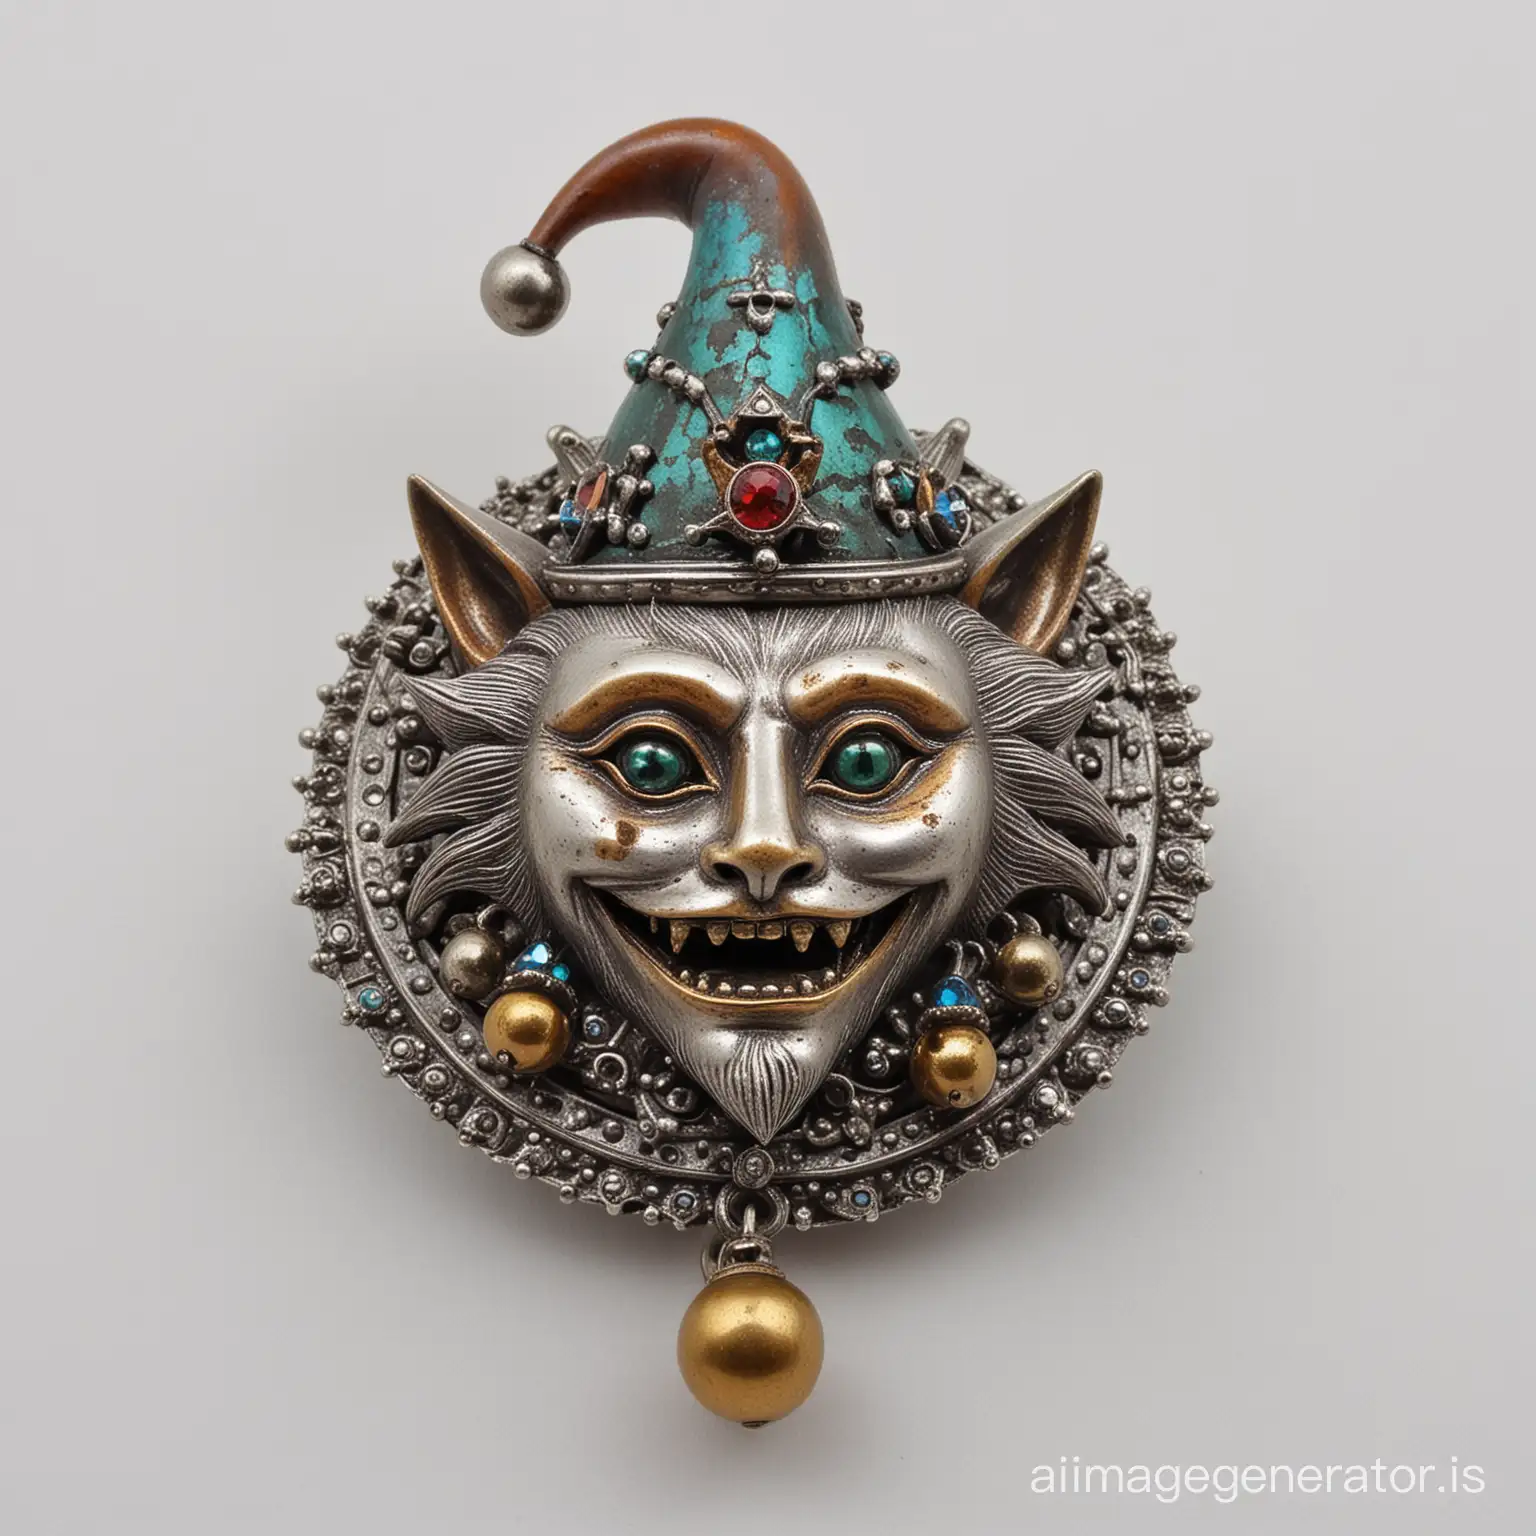 Patinated, Bejewelled, medieval brooch featuring a mad cats face wearing a jesters hat with bells as king in old silver and bronze on a white background 